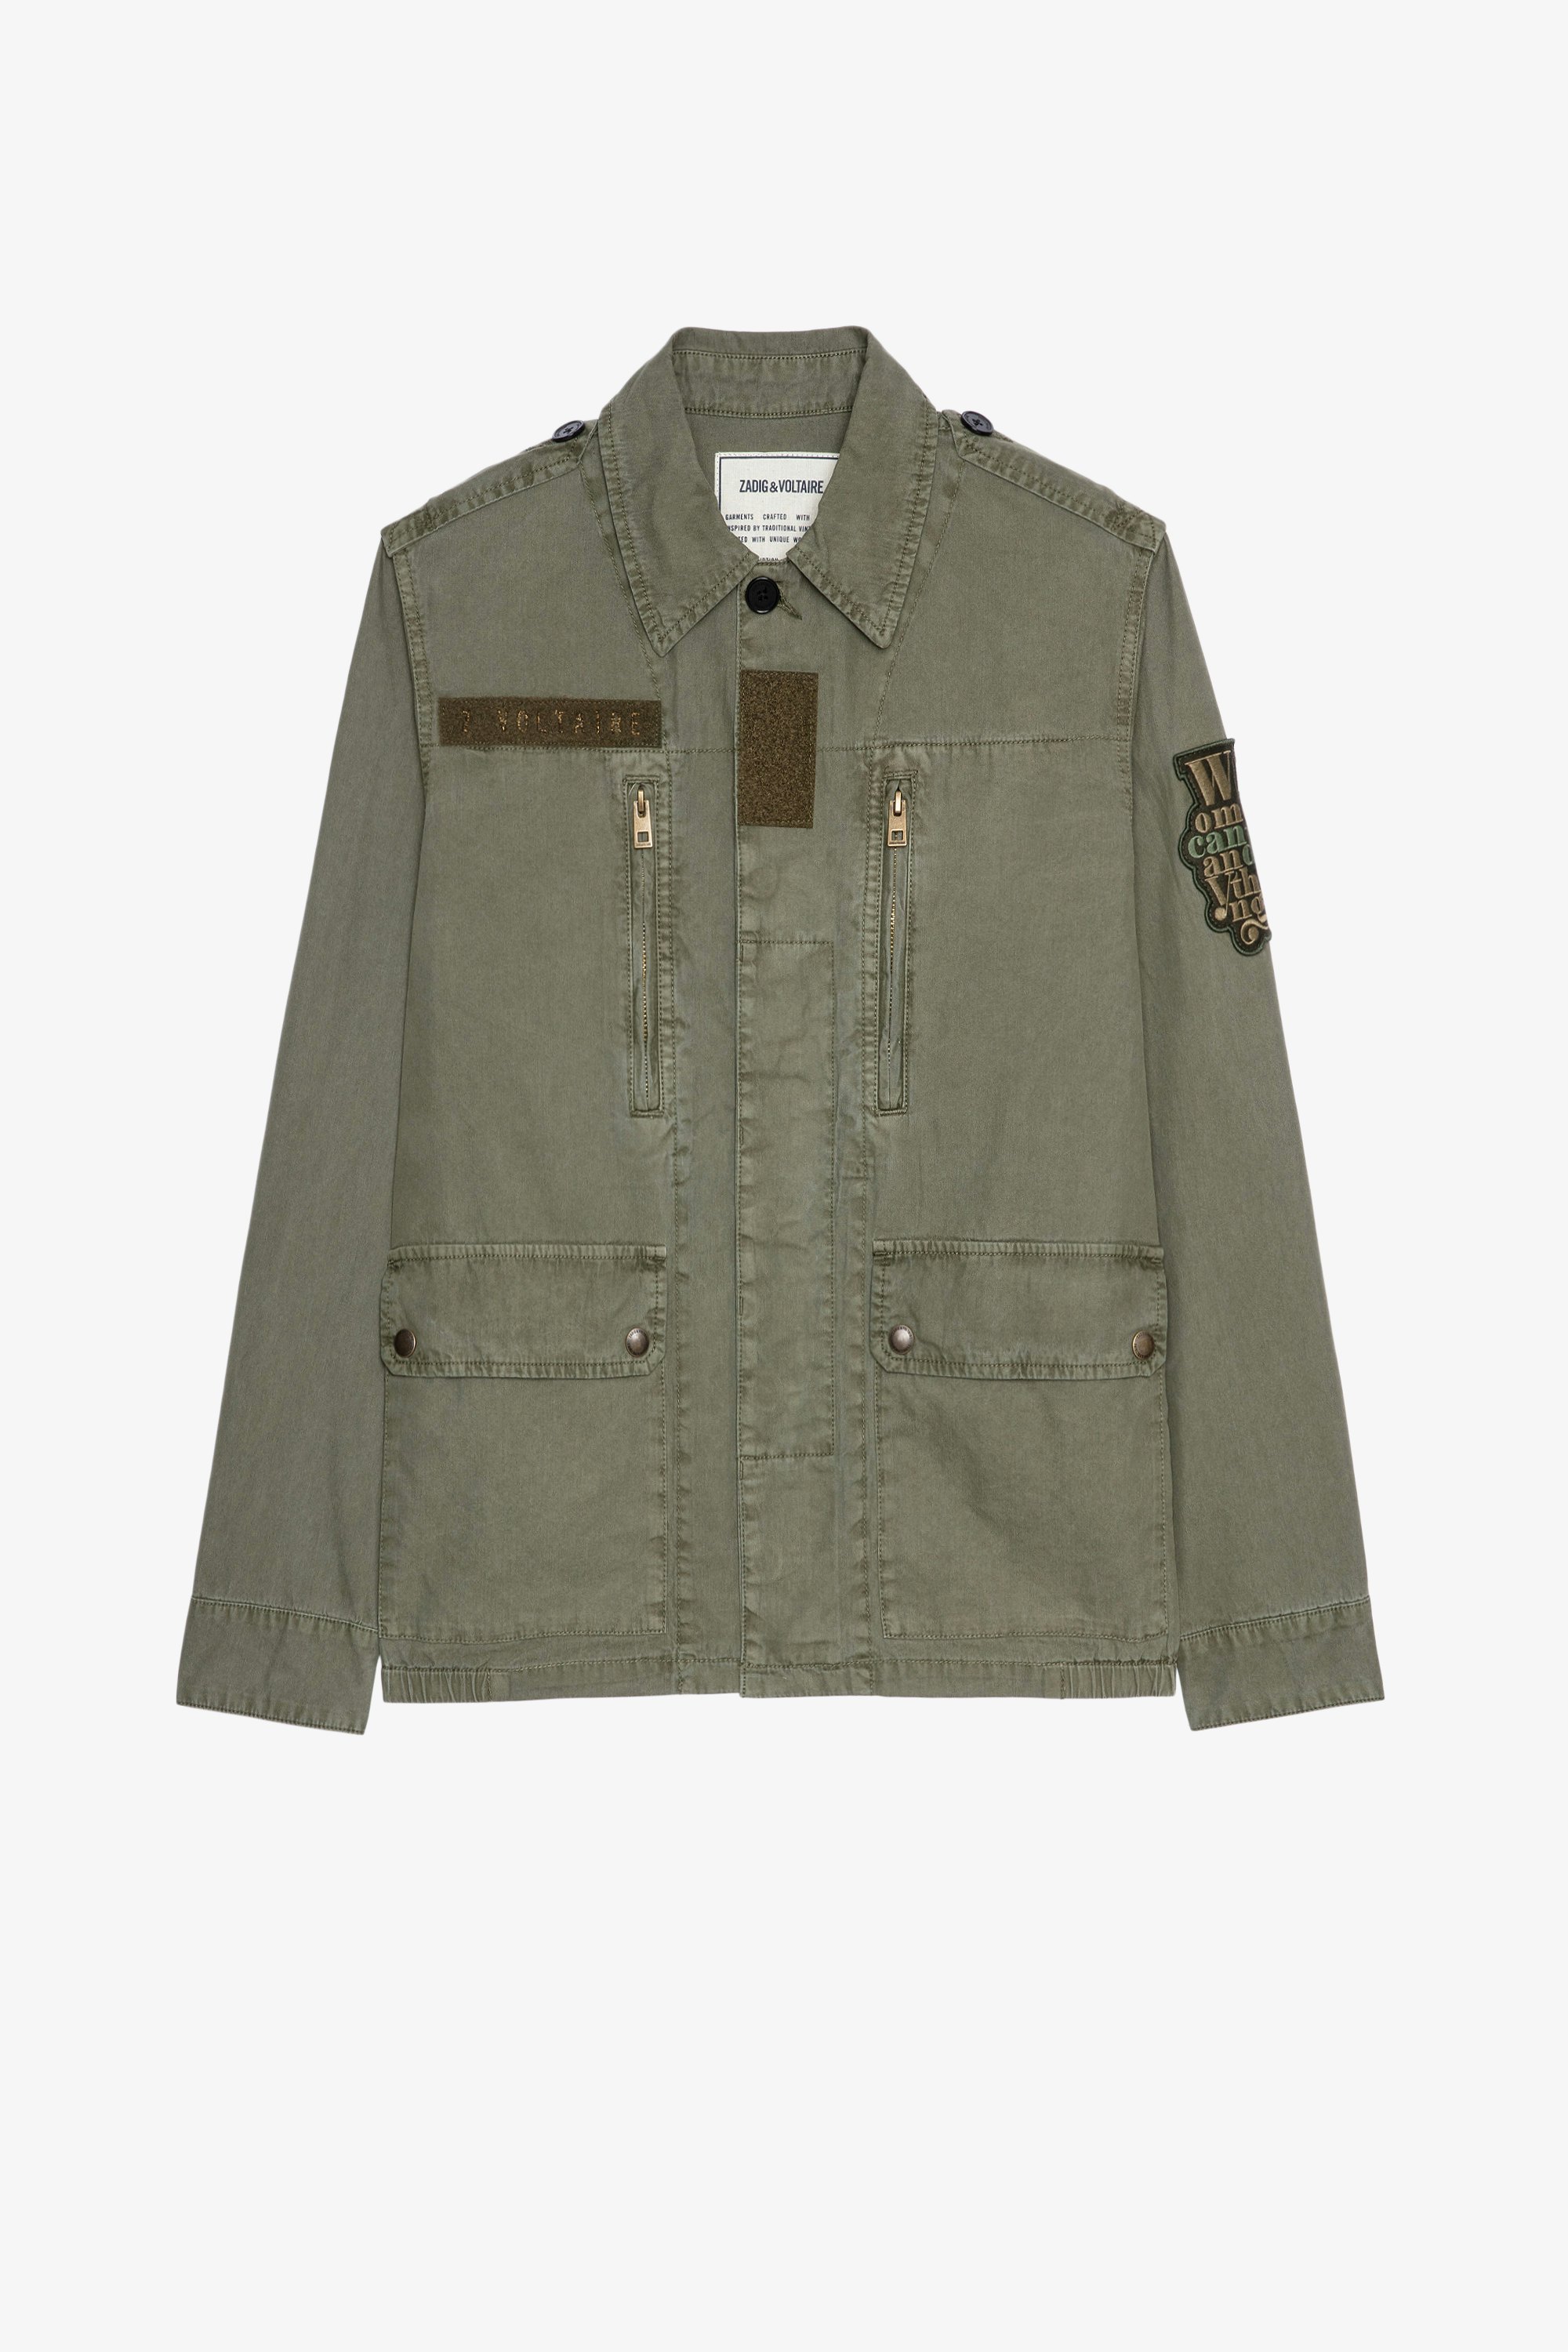 Kid Lave ジャケット Women's cotton military jacket in khaki with a patch on the left sleeve